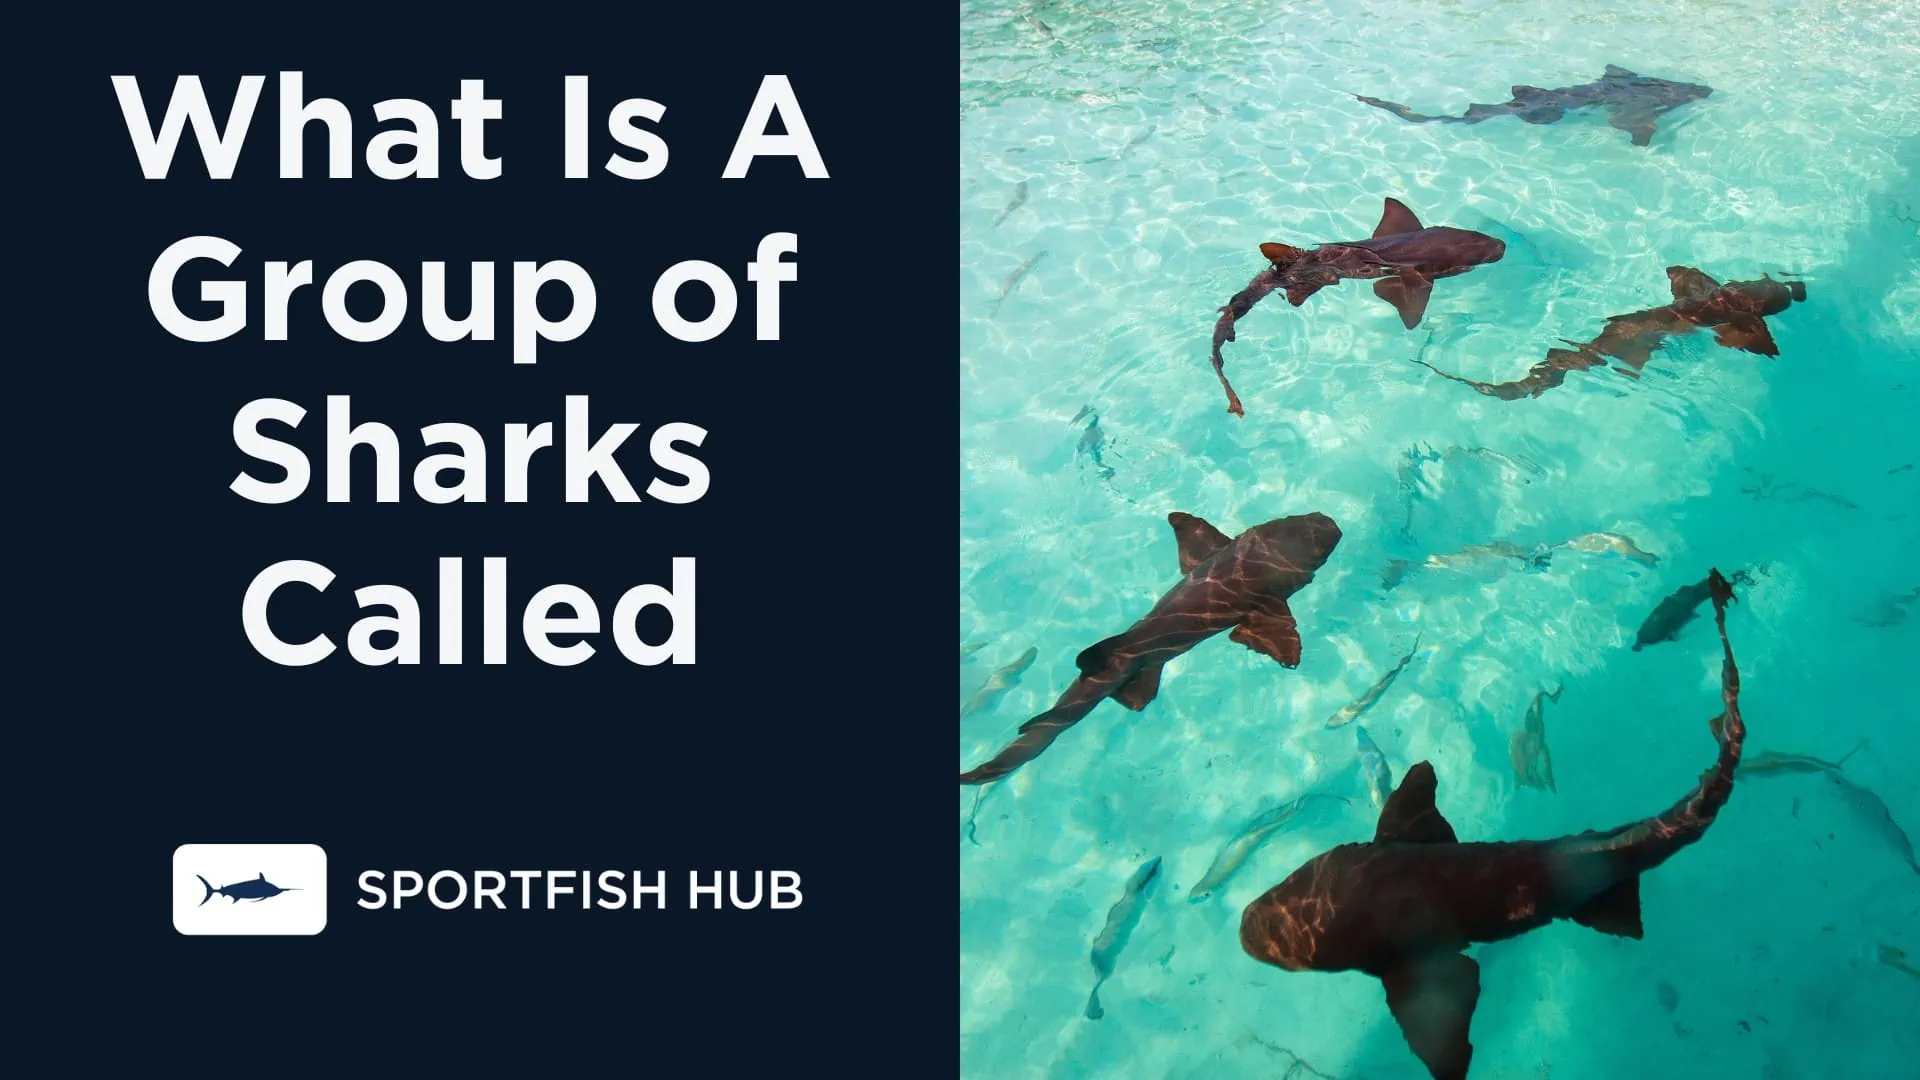 What Is A Group of Sharks Called